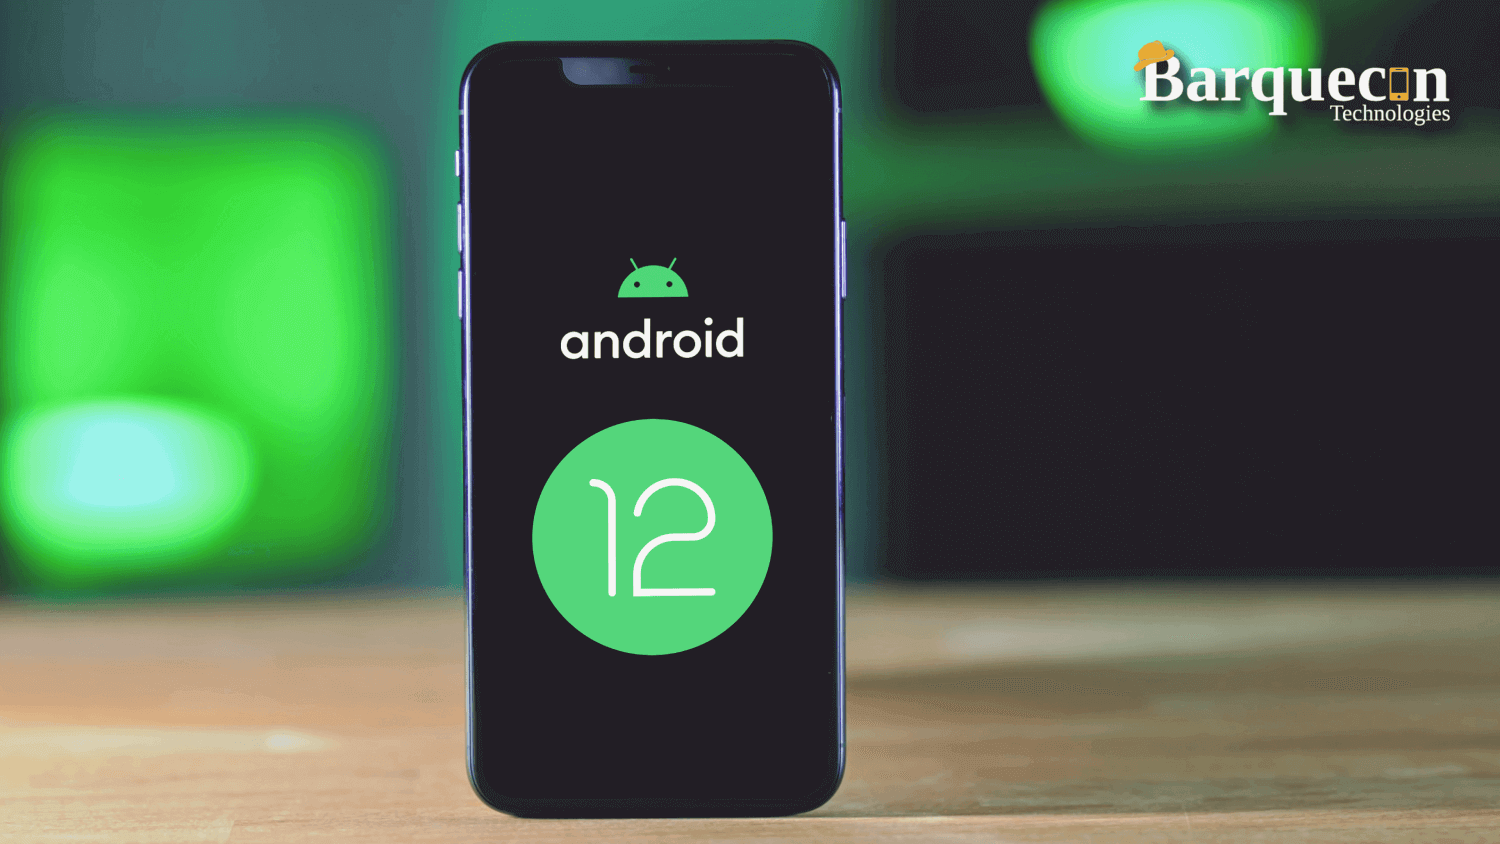 8 New Features of Android 12 You Didn’t Know